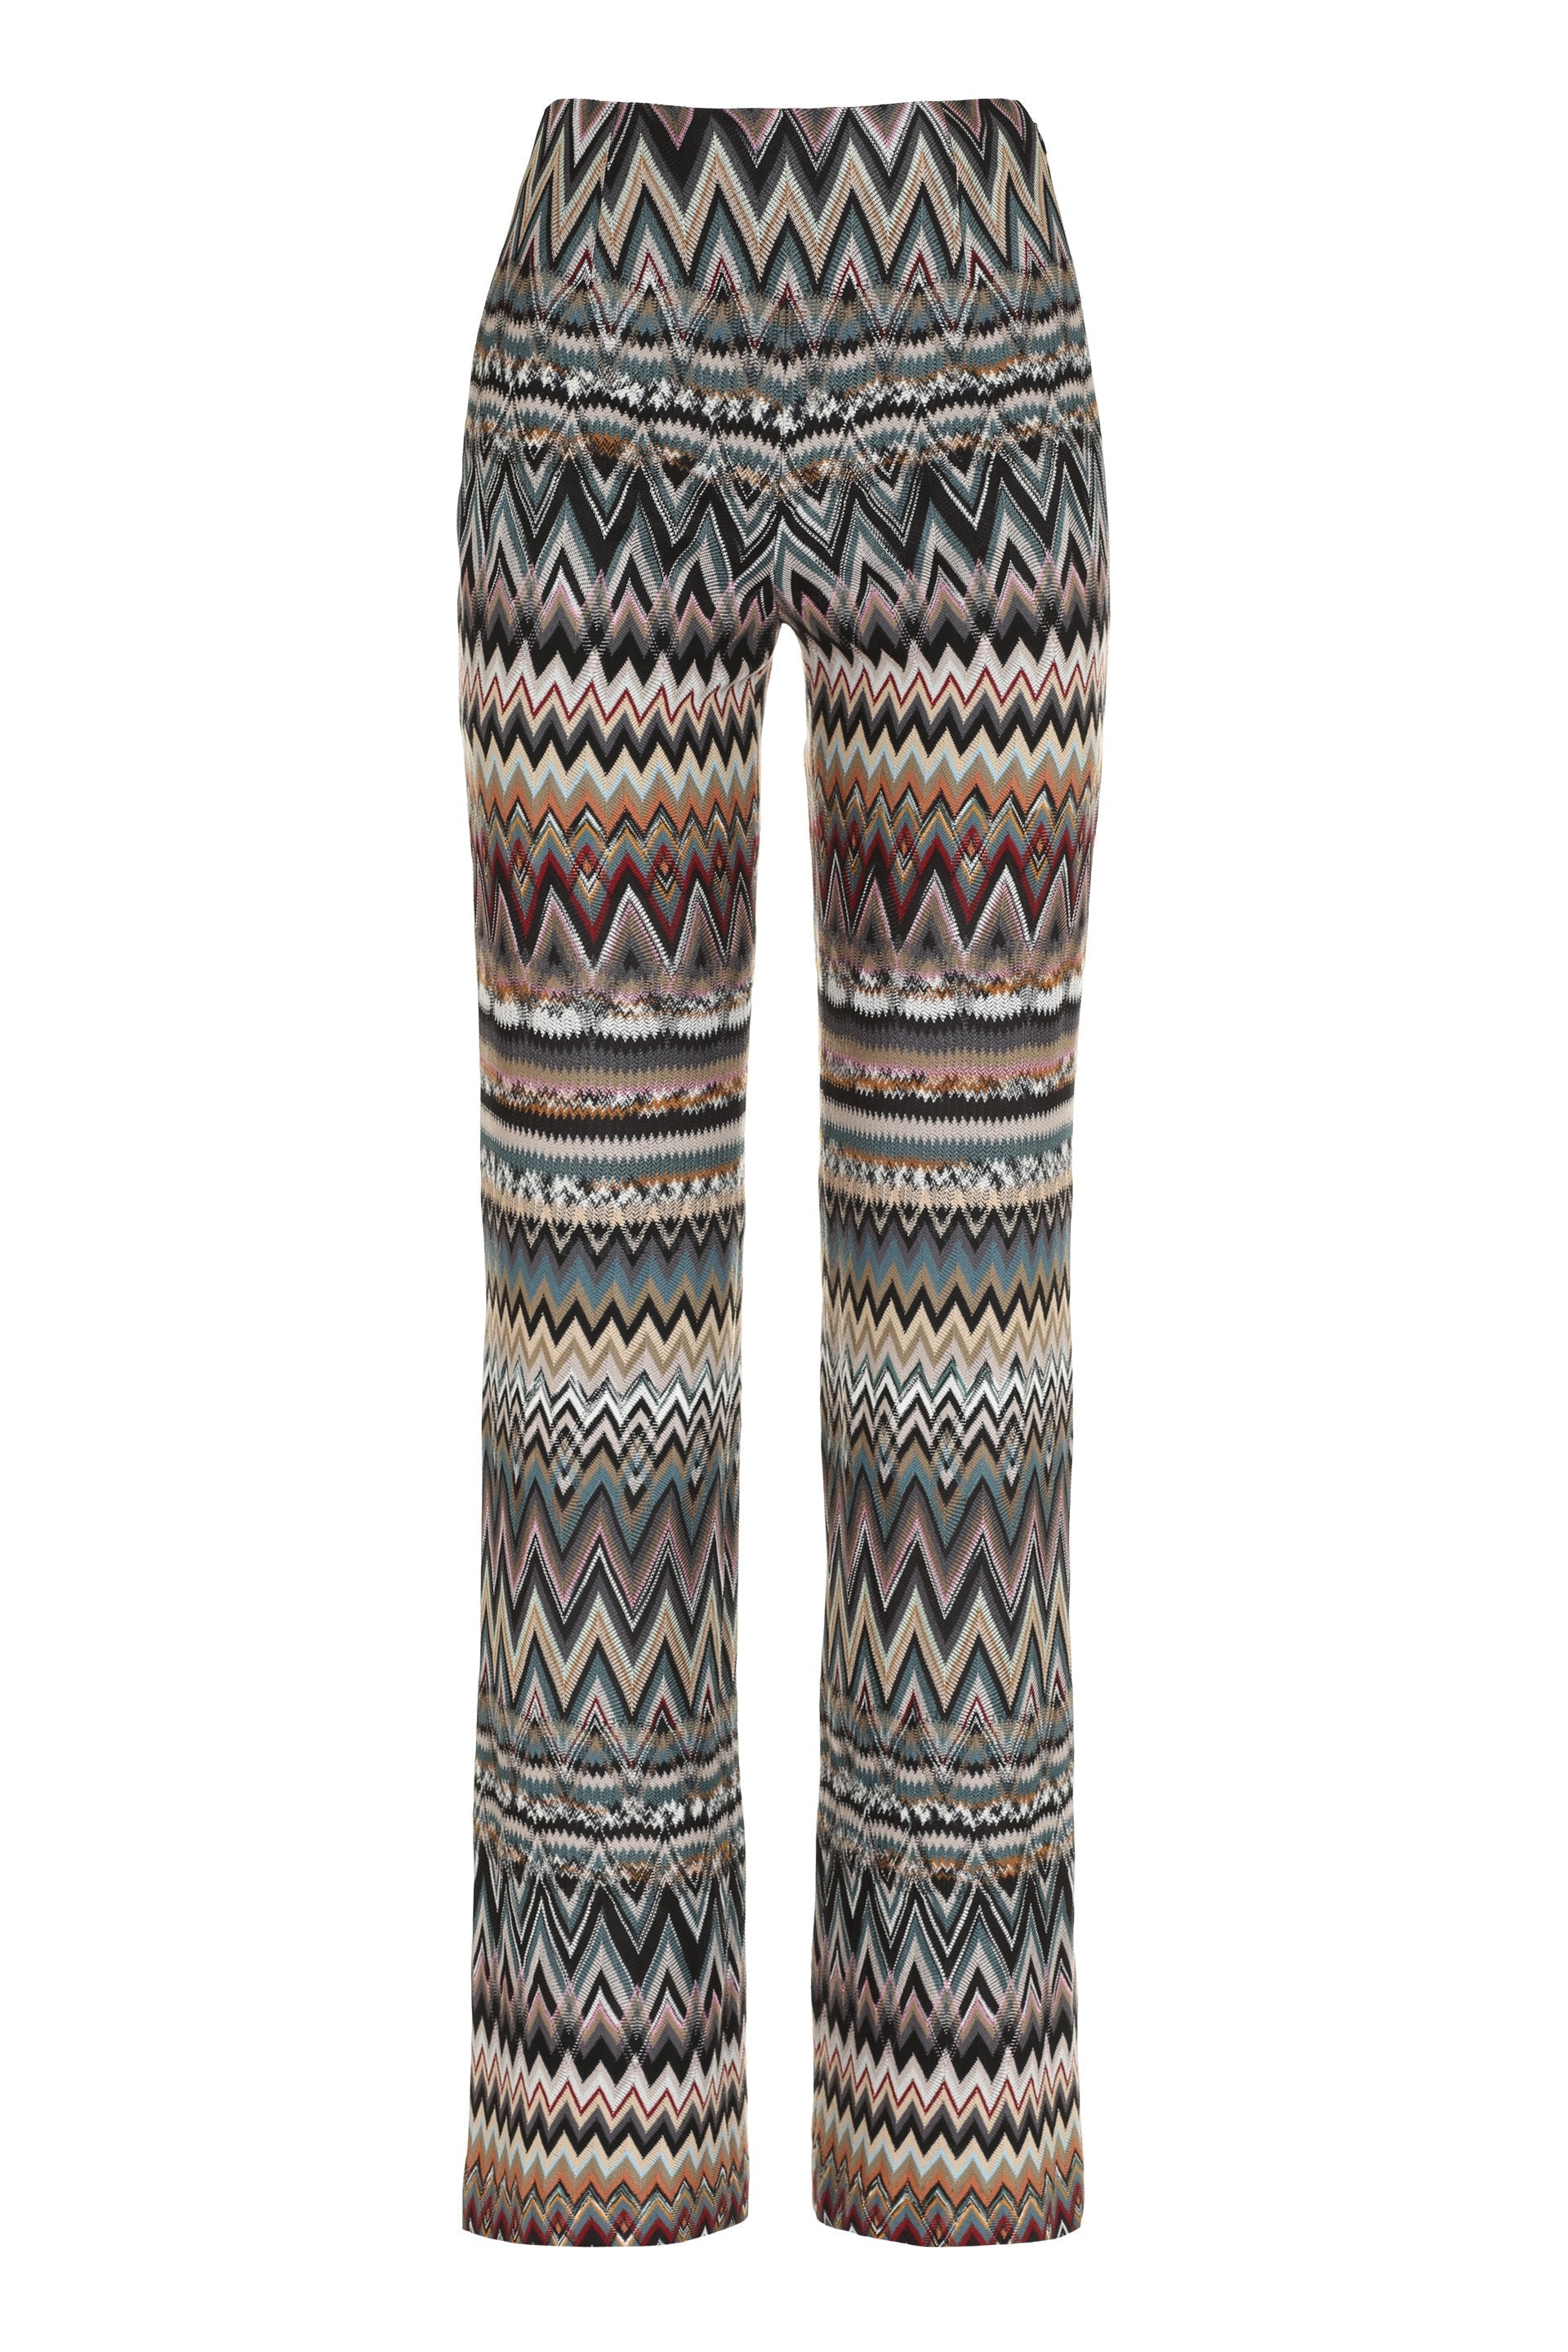 Chevron knitted palazzo trousers-Missoni-OUTLET-SALE-40-ARCHIVIST